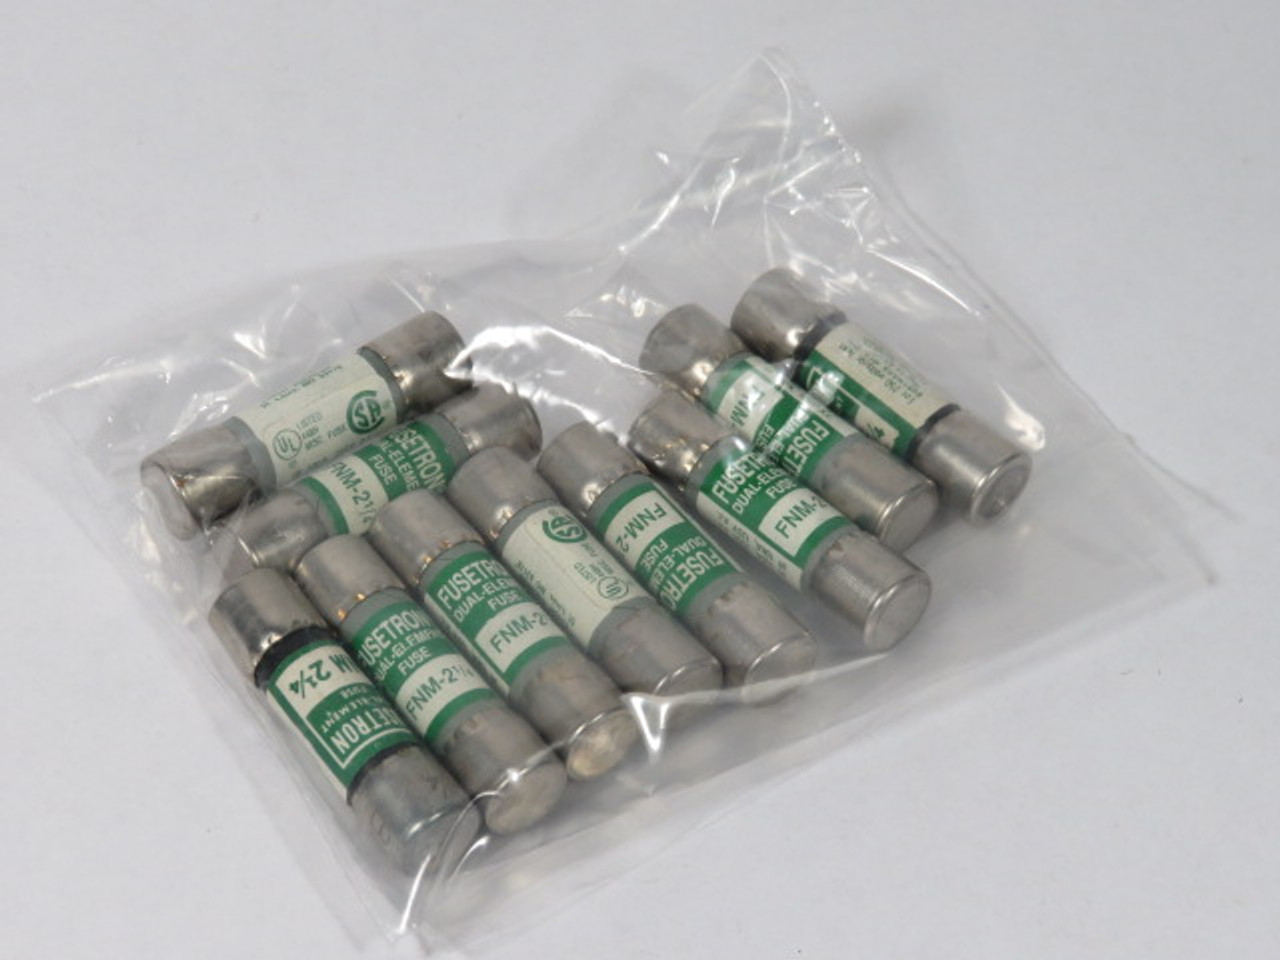 Fusetron FNM-2-1/4 Dual Element Fuse 2-1/4A 250V Lot of 10 USED